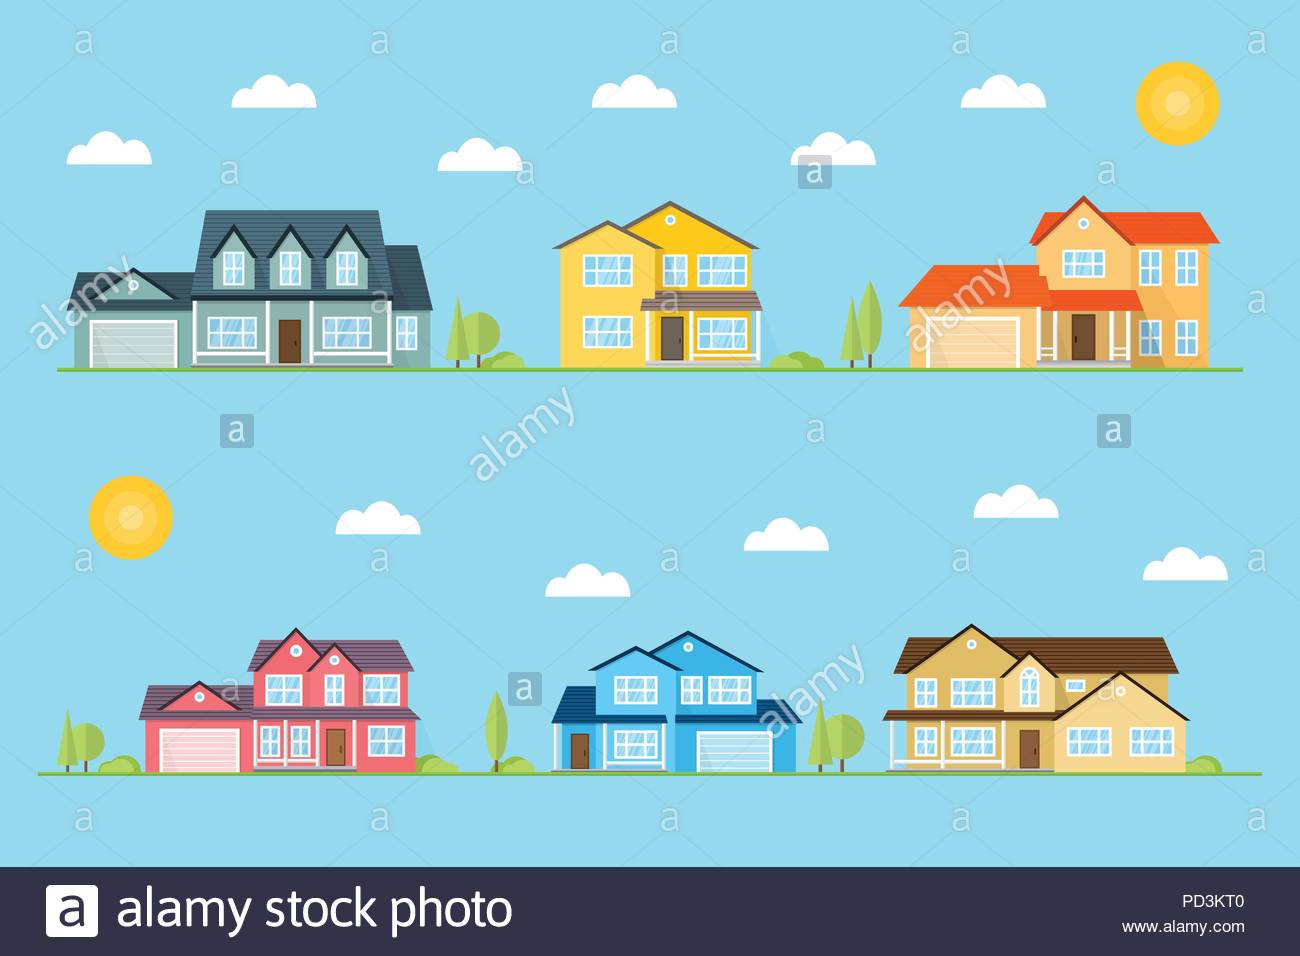 Neighborhood With Homes Illustrated On The Blue Background Vector